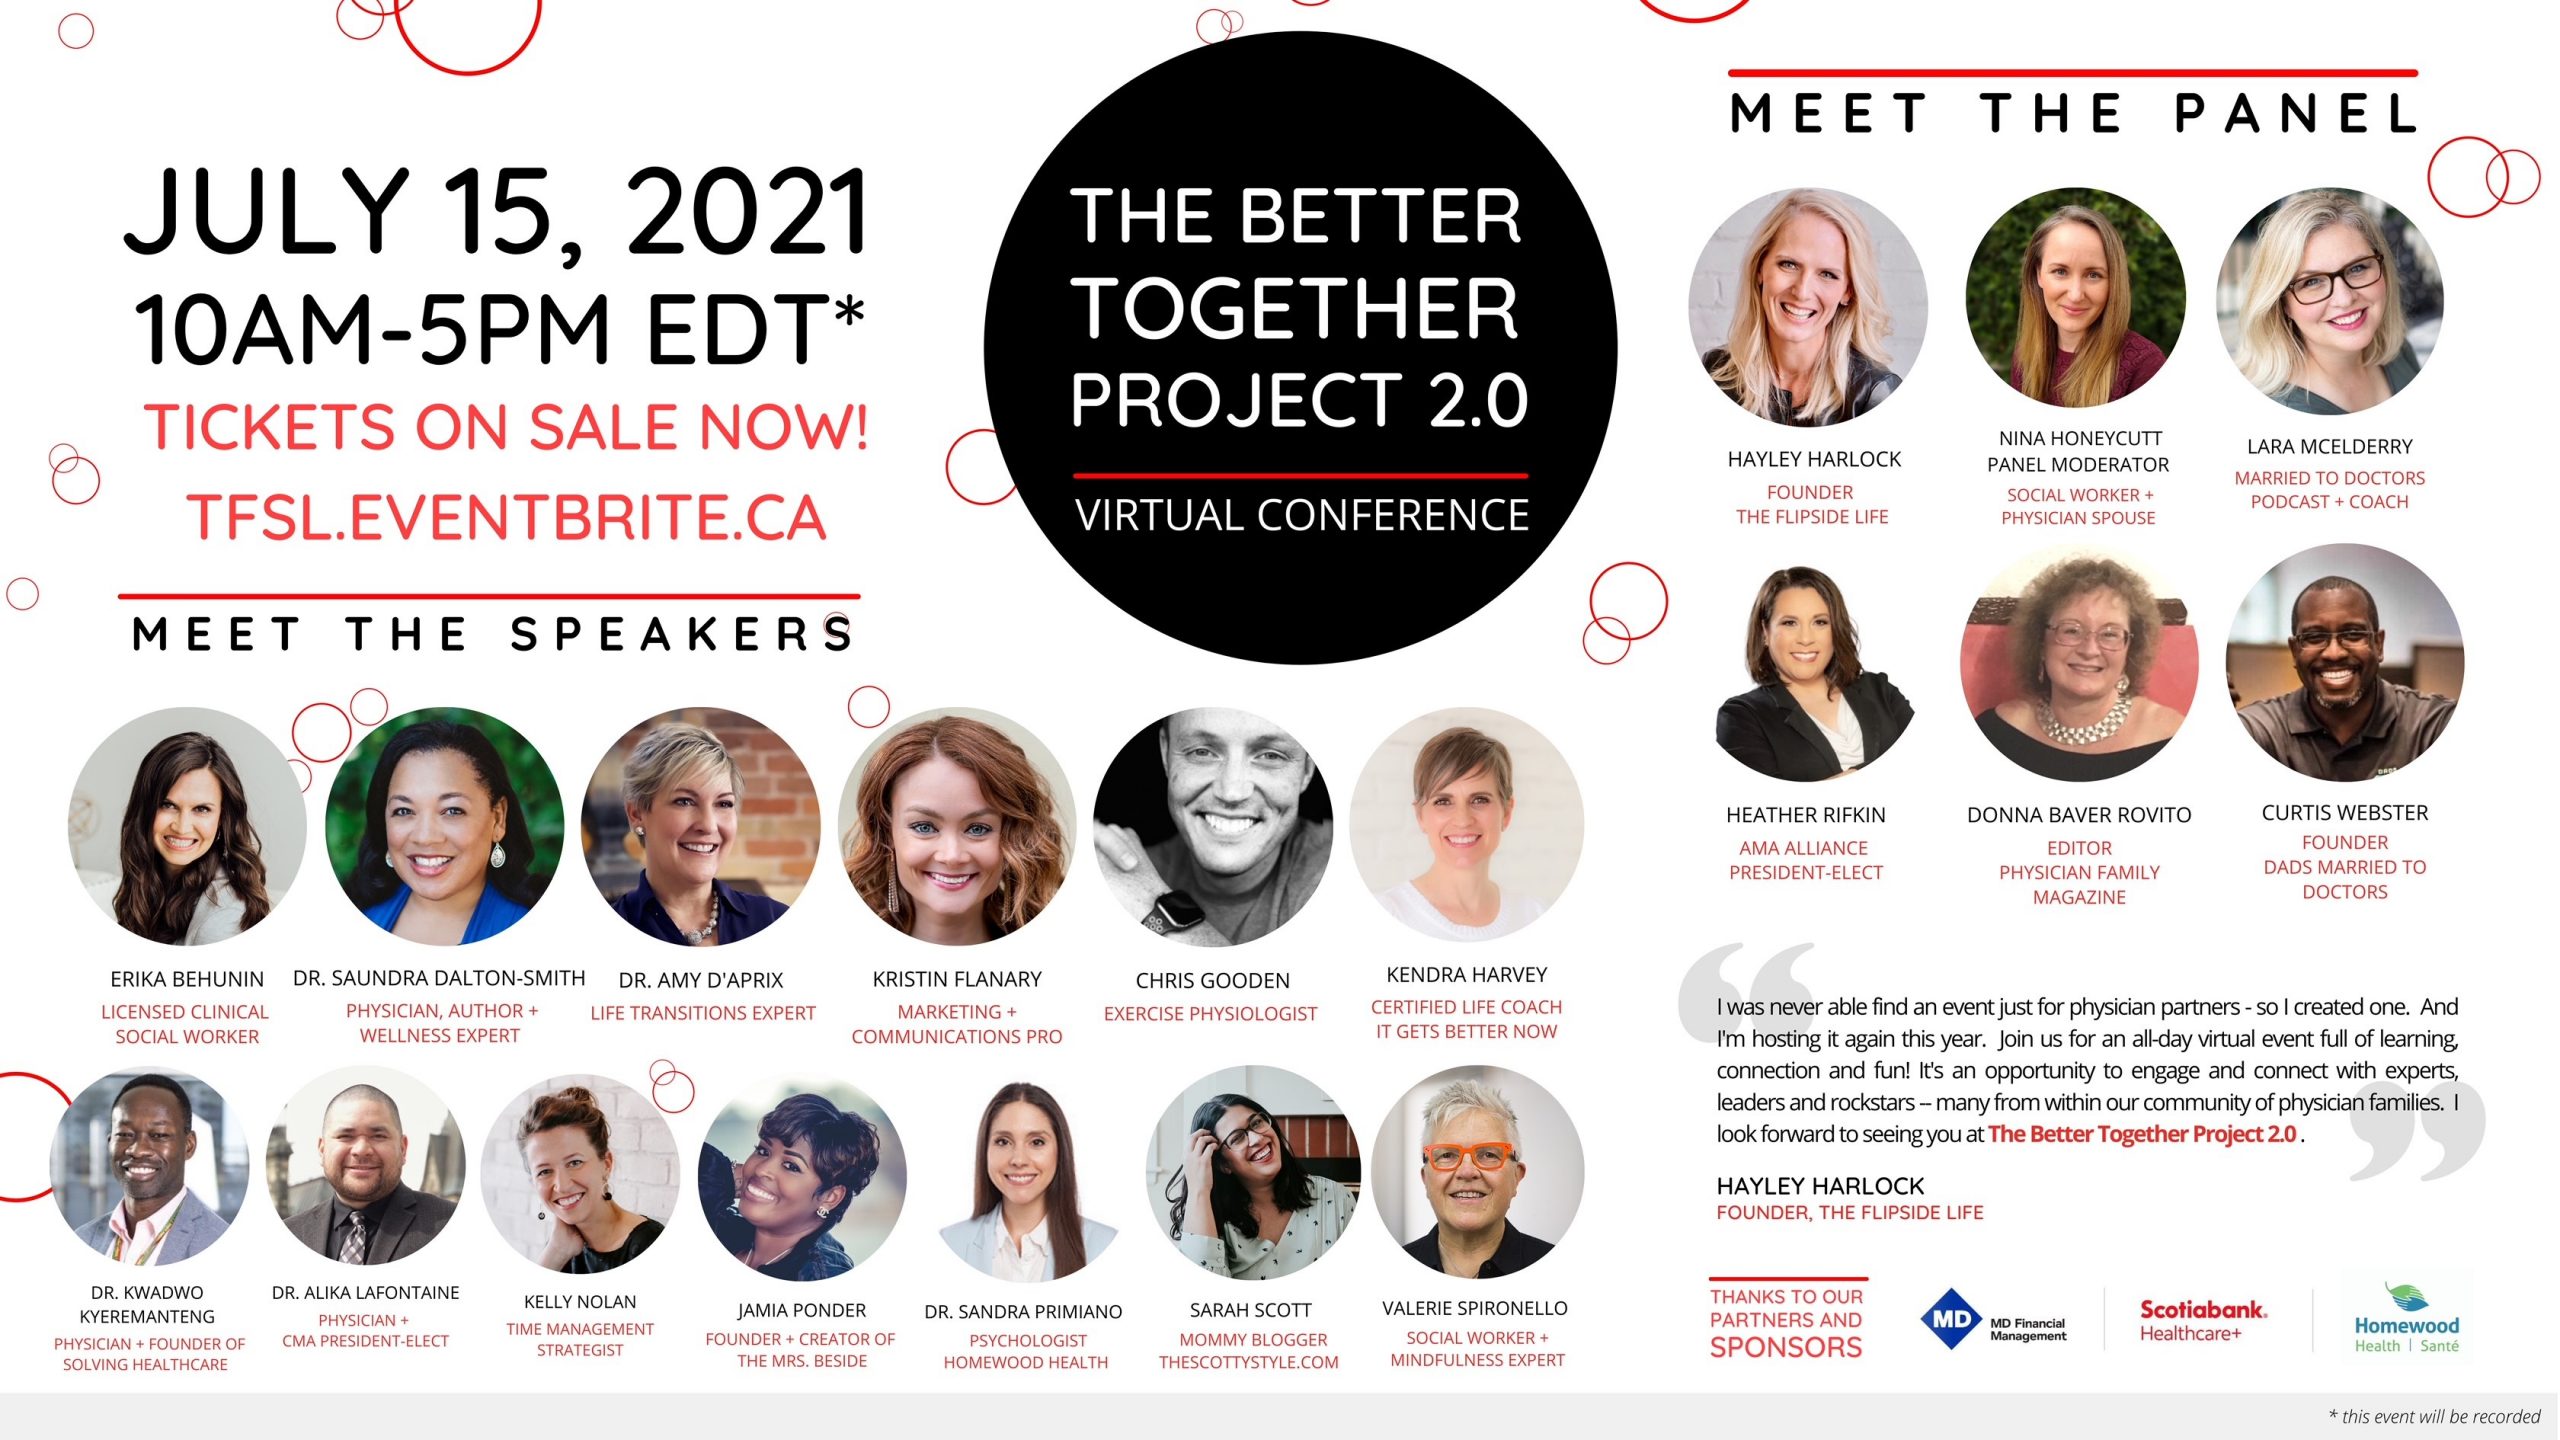 The Better Together Project 2.0 Virtual Conference